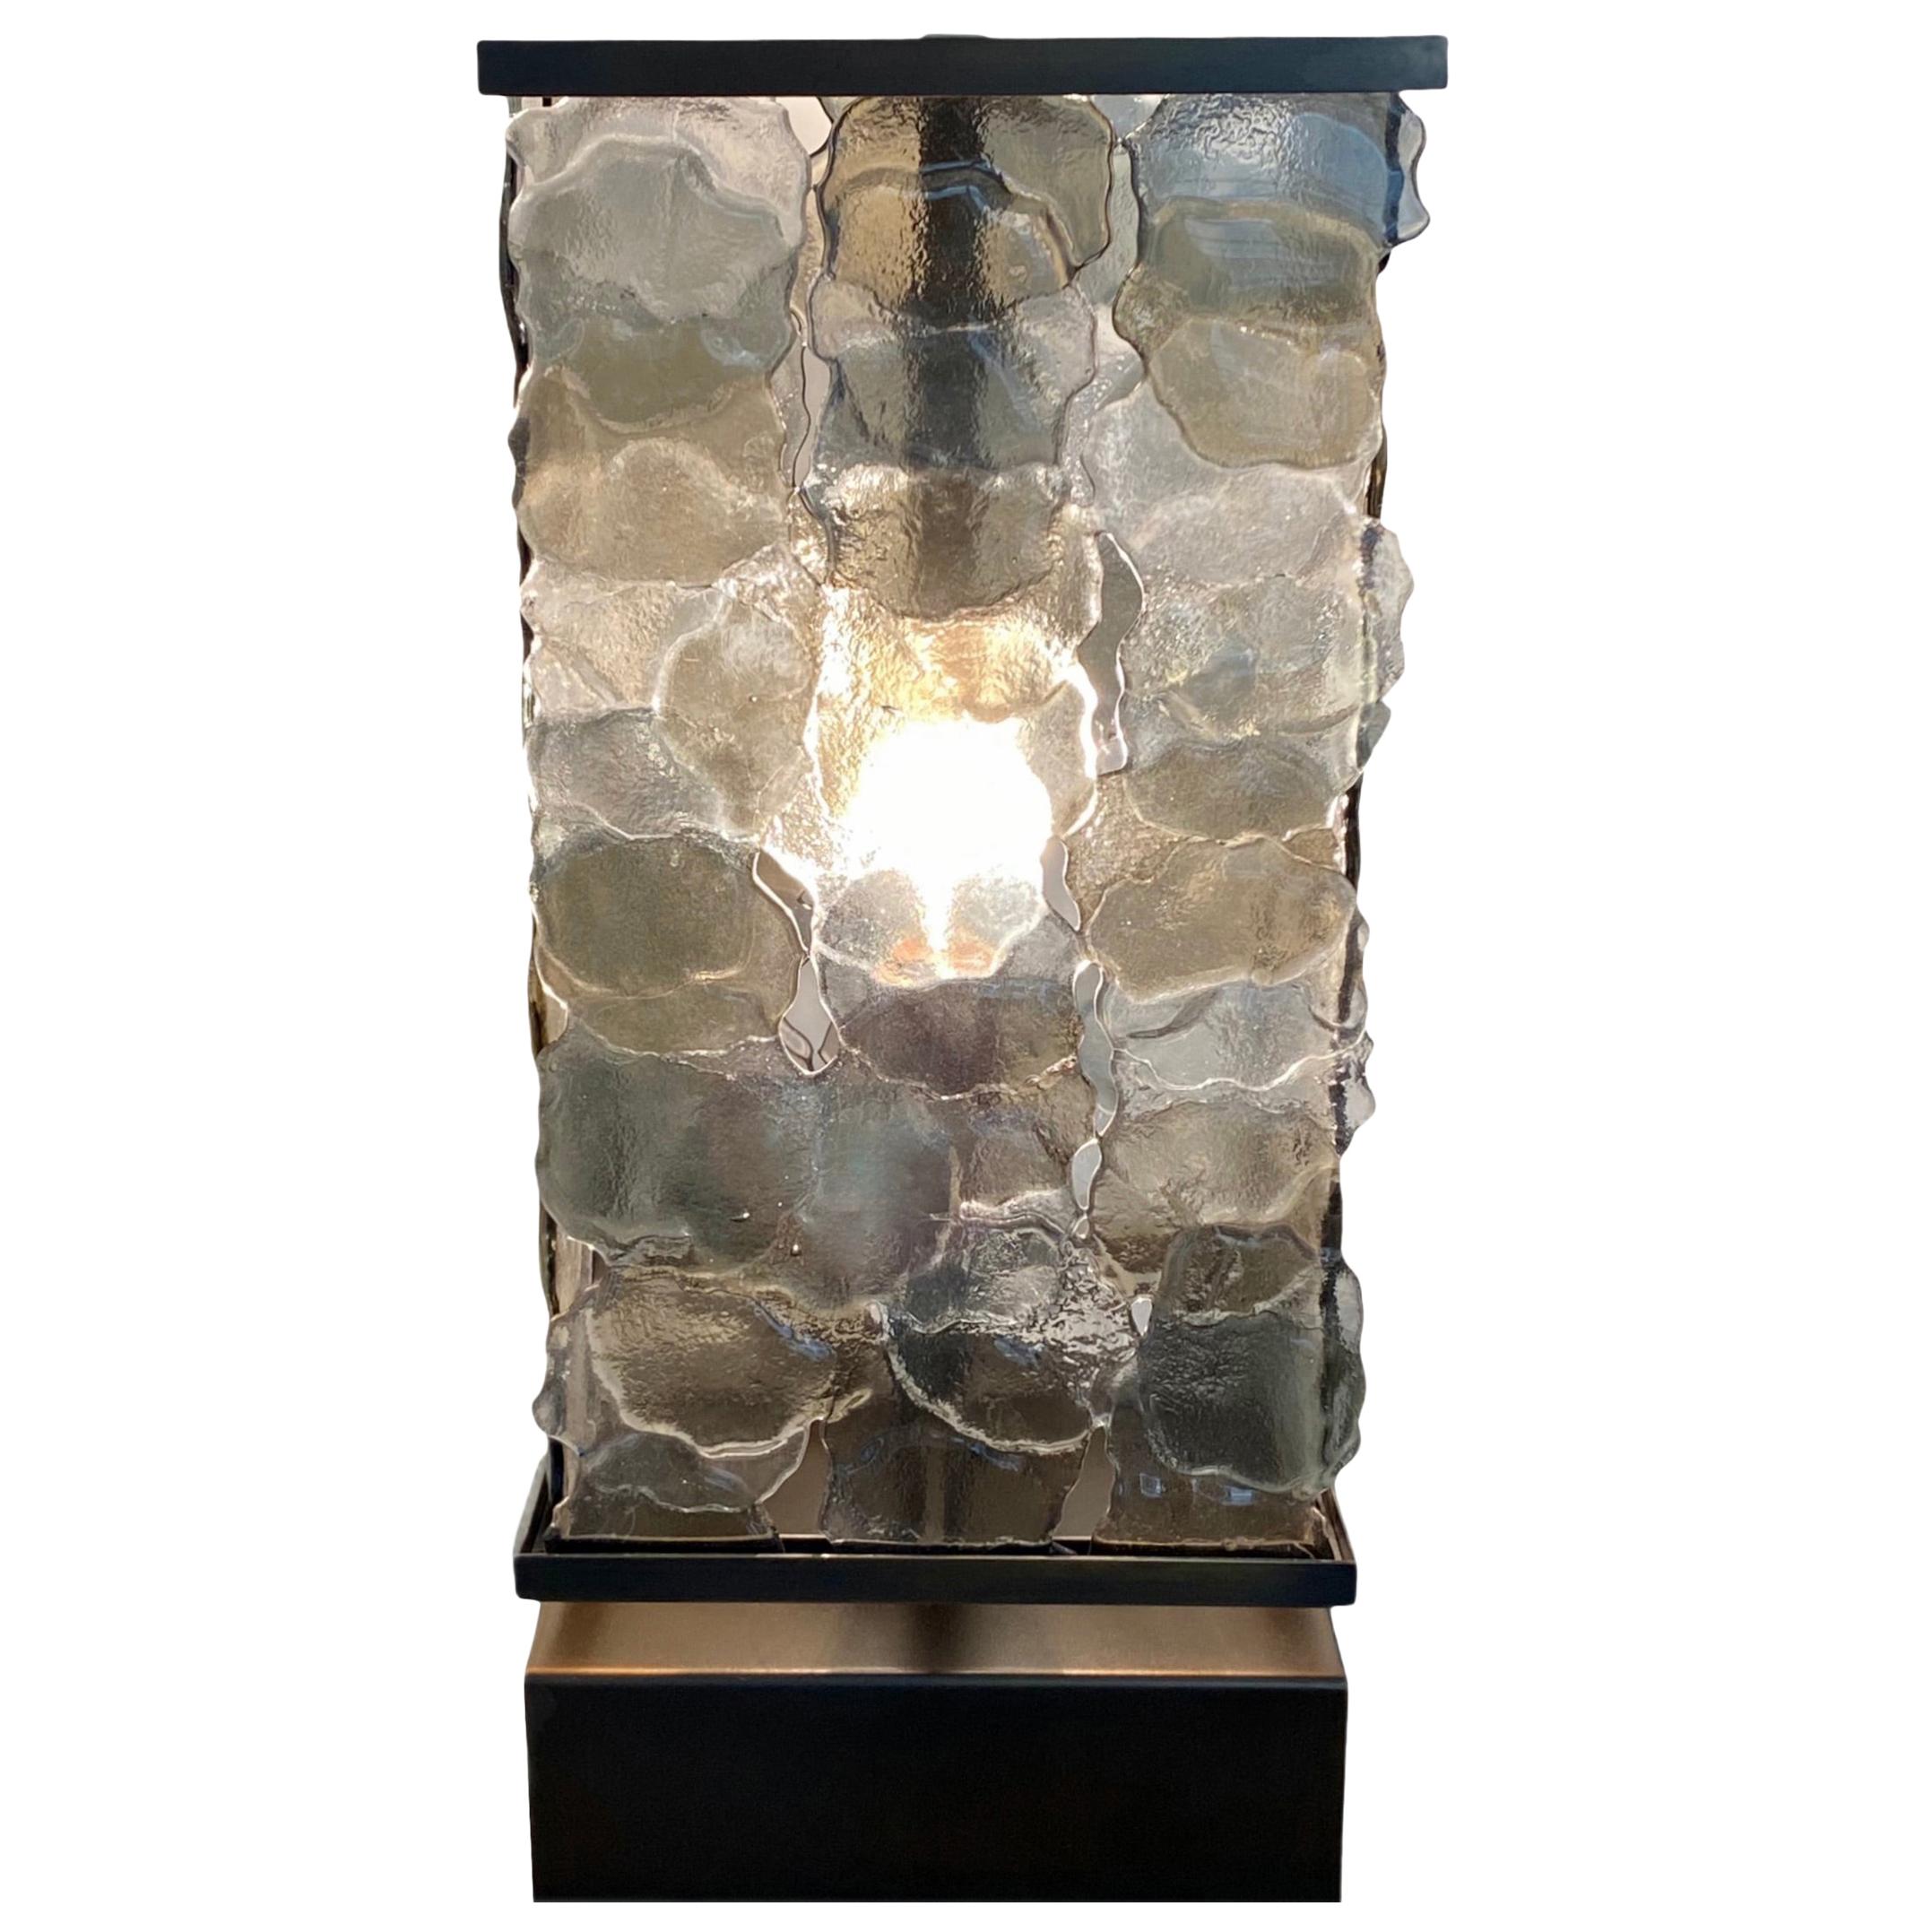 Artistic Large Sculptural Table Lamp with Metal Base and Black Fabric Cord